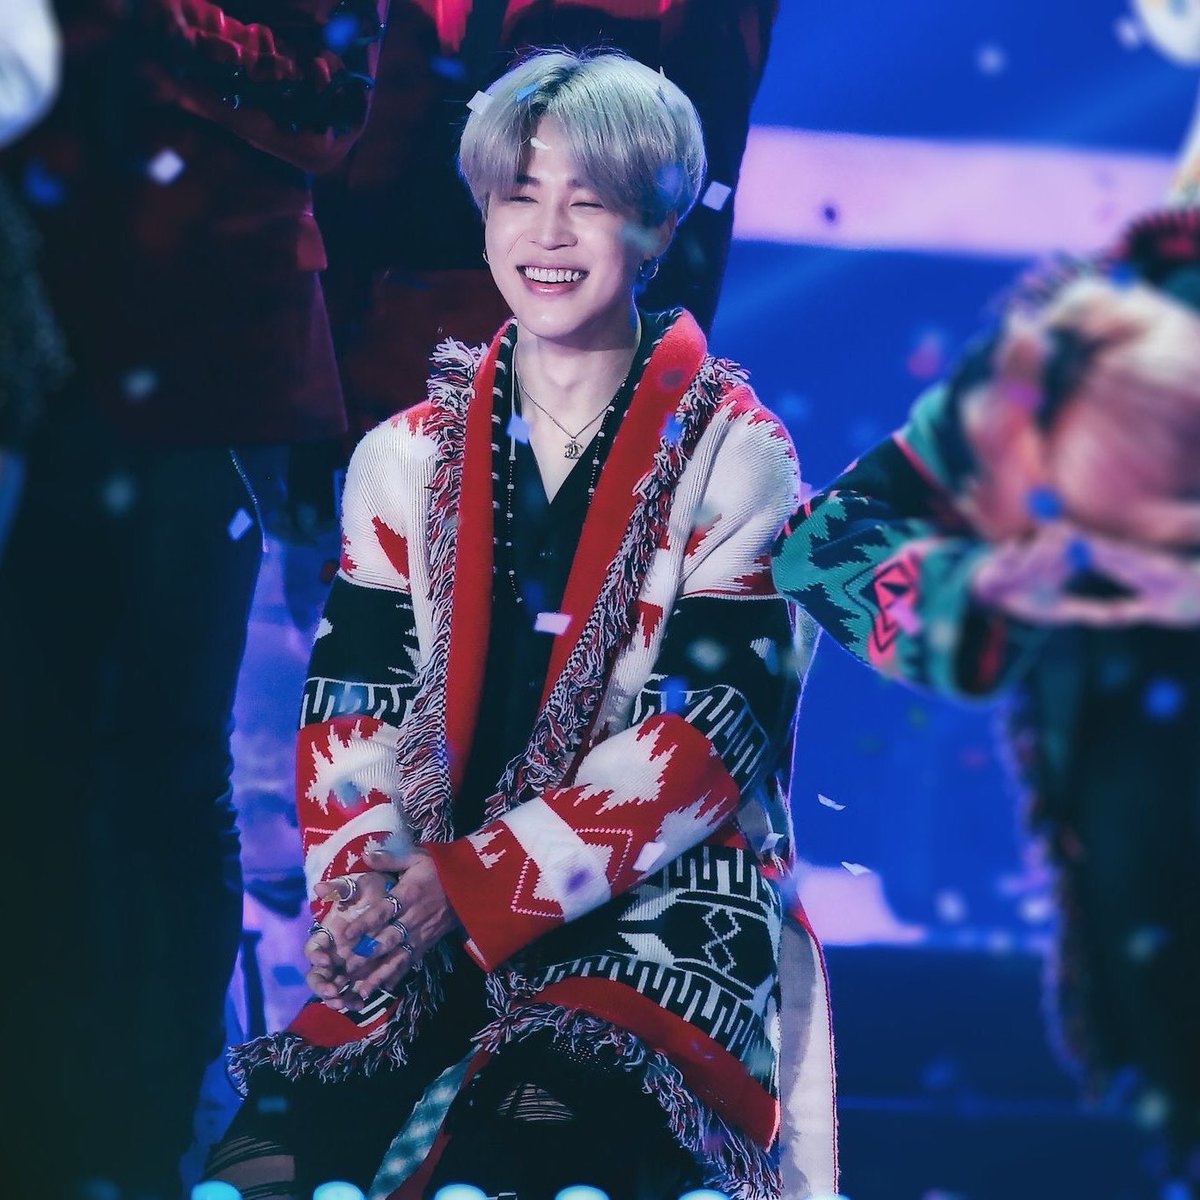 jimin devastating photo sequence; a thread to make you smile